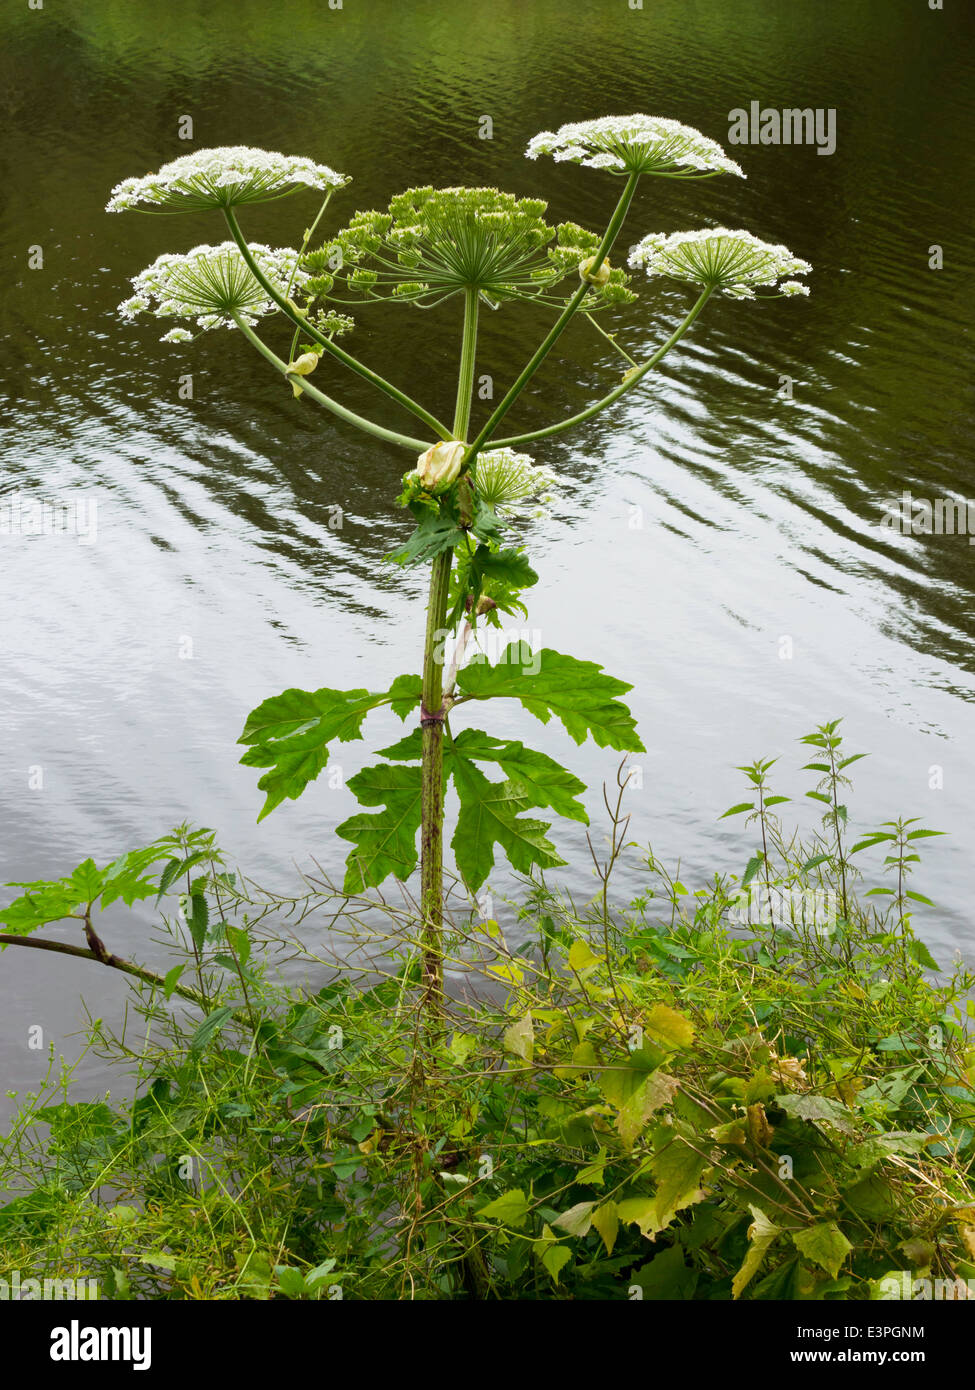 Giant Hogweed plant species Heracleum mantegazzianum, growing on the bank of the river Tees in Yarm England UK Stock Photo